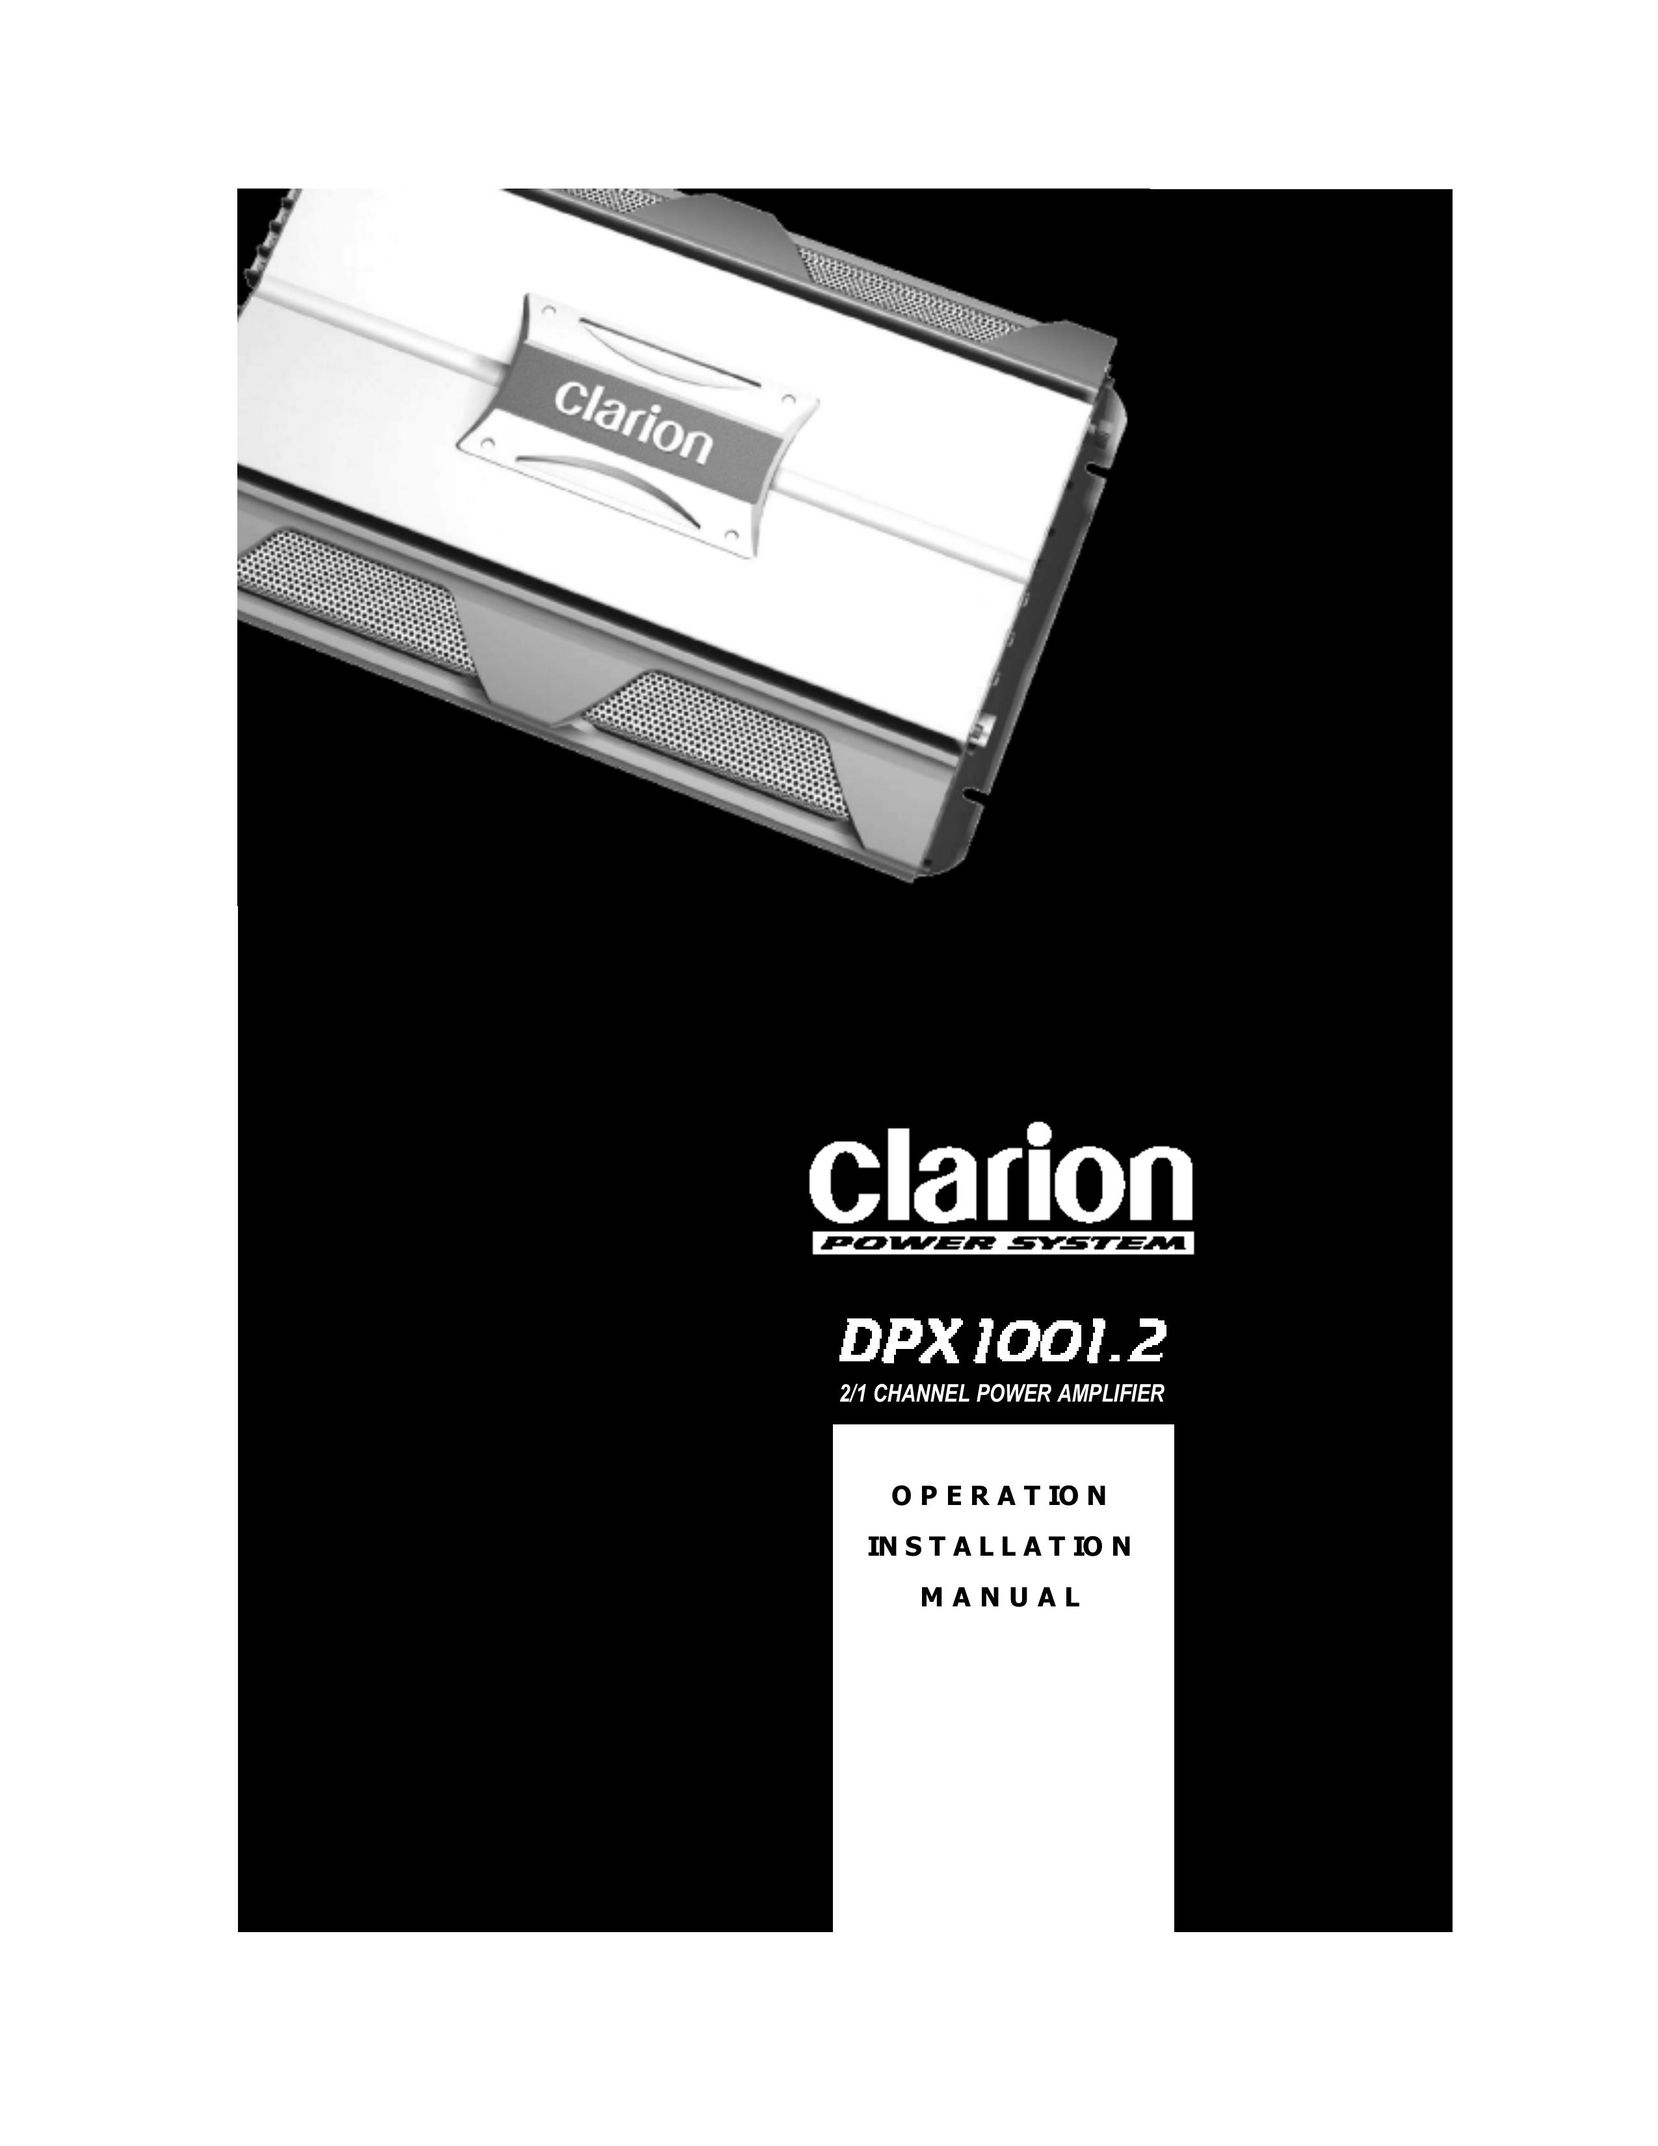 Clarion DPX1001.2 Stereo Amplifier User Manual